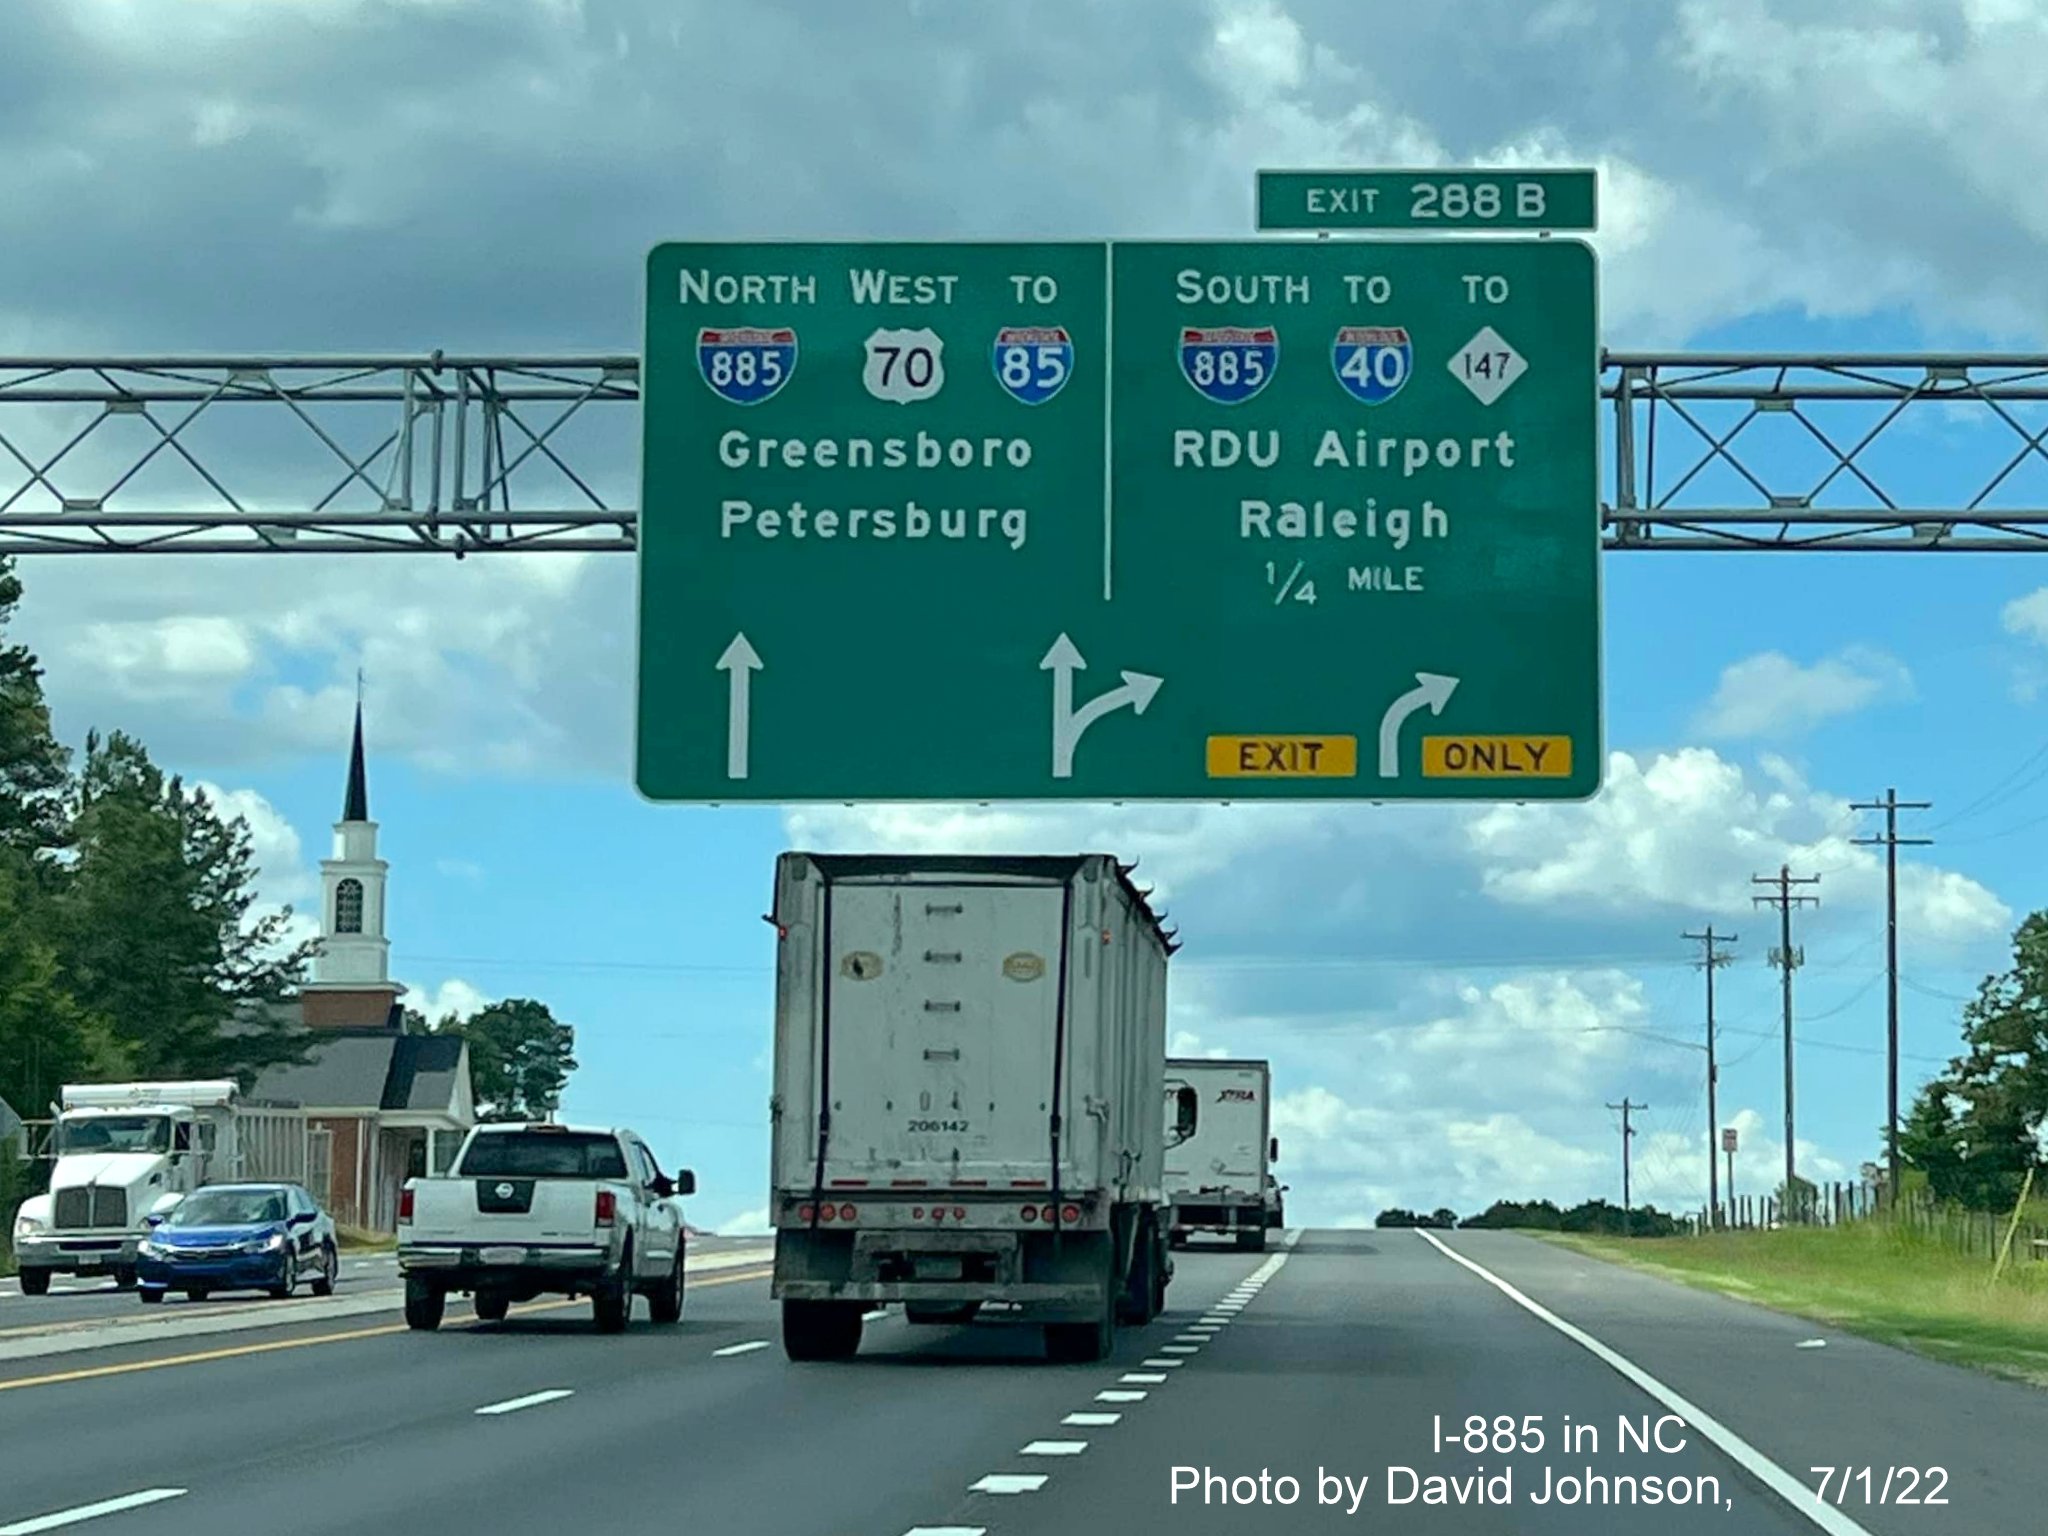 Image of uncovered arrow per lane 1/4 mile advance overhead sign for newly opened I-885 East End Connector exit on US 70 West in Durham, by David Johnson July 2022